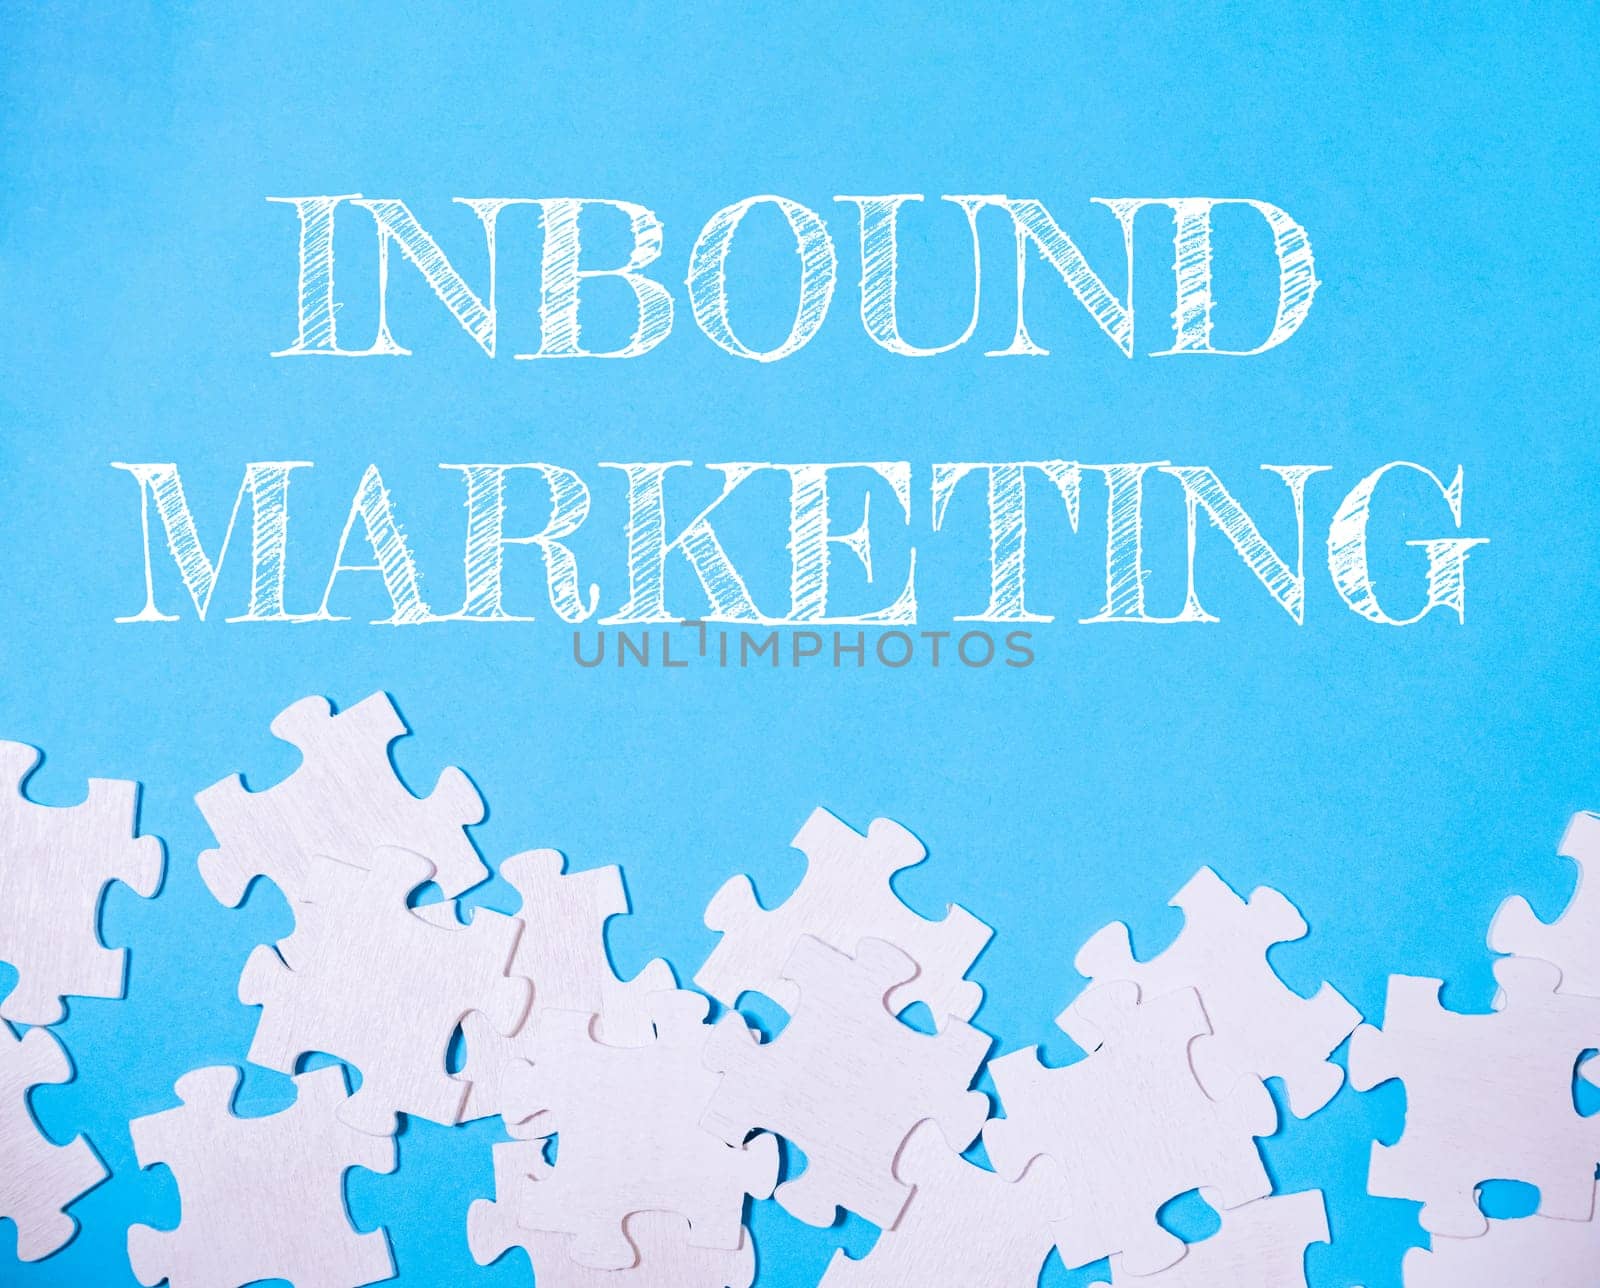 Inbound marketing is a strategy that focuses on attracting potential customers through search engines and social media. It involves creating valuable content that is relevant to the target audience